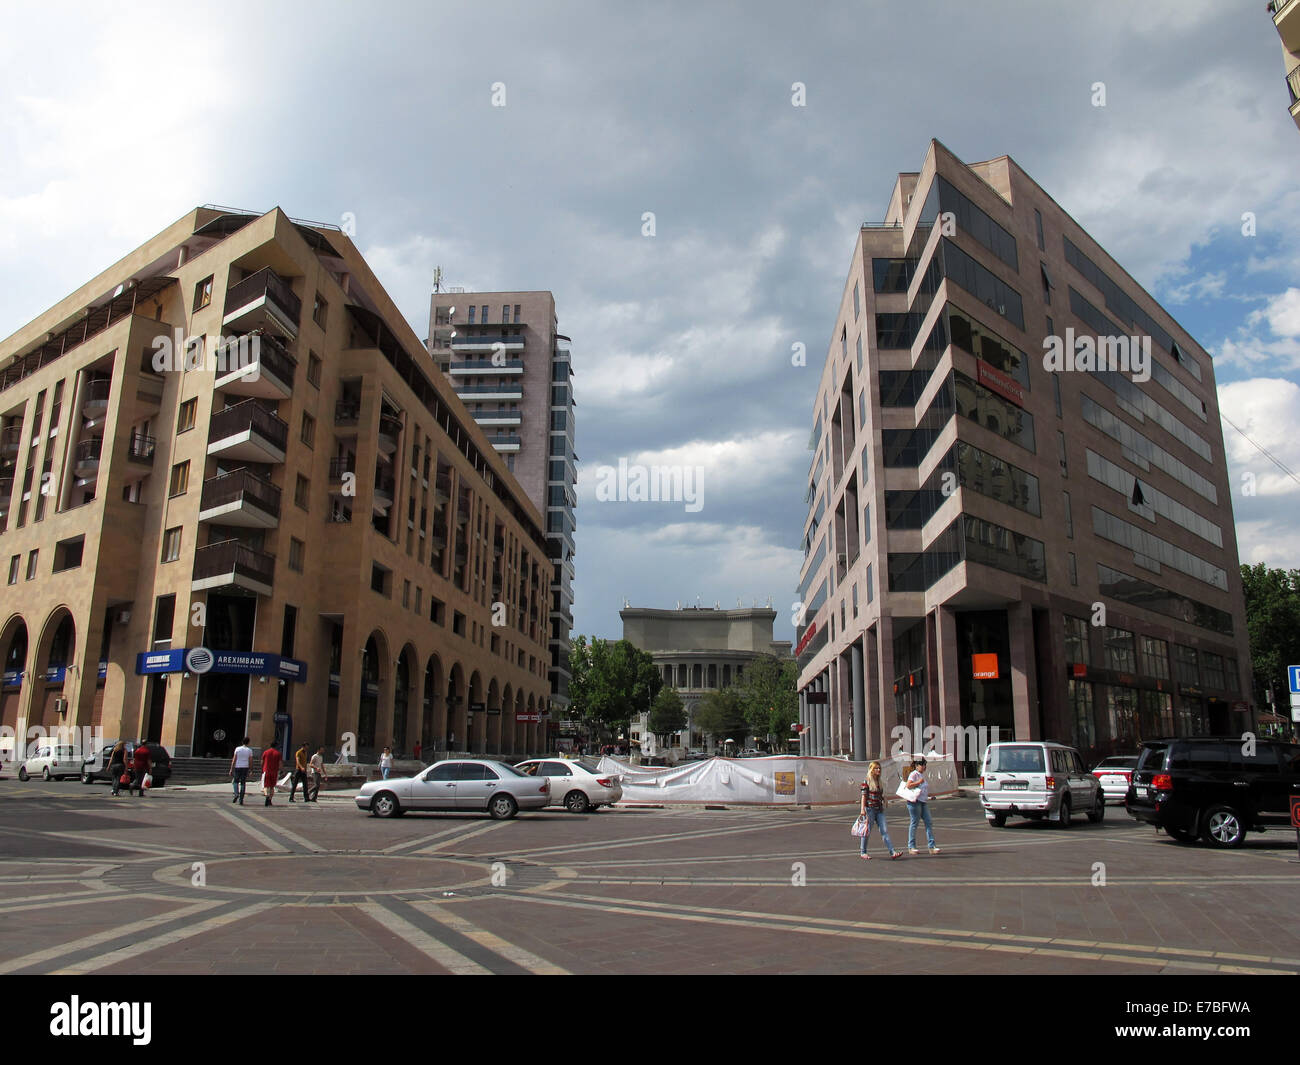 Modern residential and office buildings in the centre of the Armenian capital Yerevan on 29 June 2014. The opera house is pictured in the background. Photo: Jens Kalaene -NO WIRE SERVICE- Stock Photo